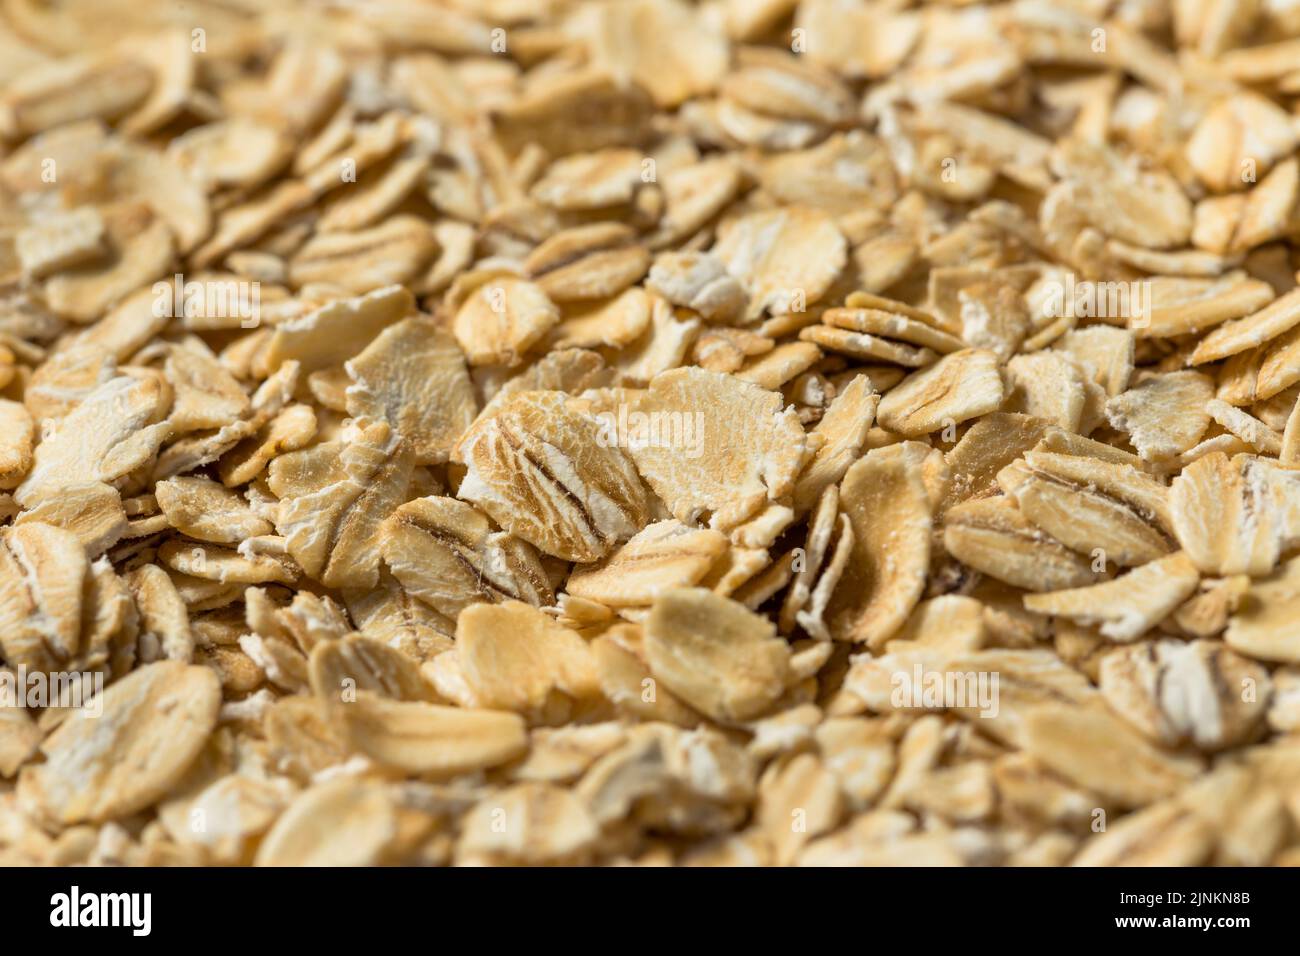 Dry Organic Rolled Oats Oatmeal in a Bowl Stock Photo